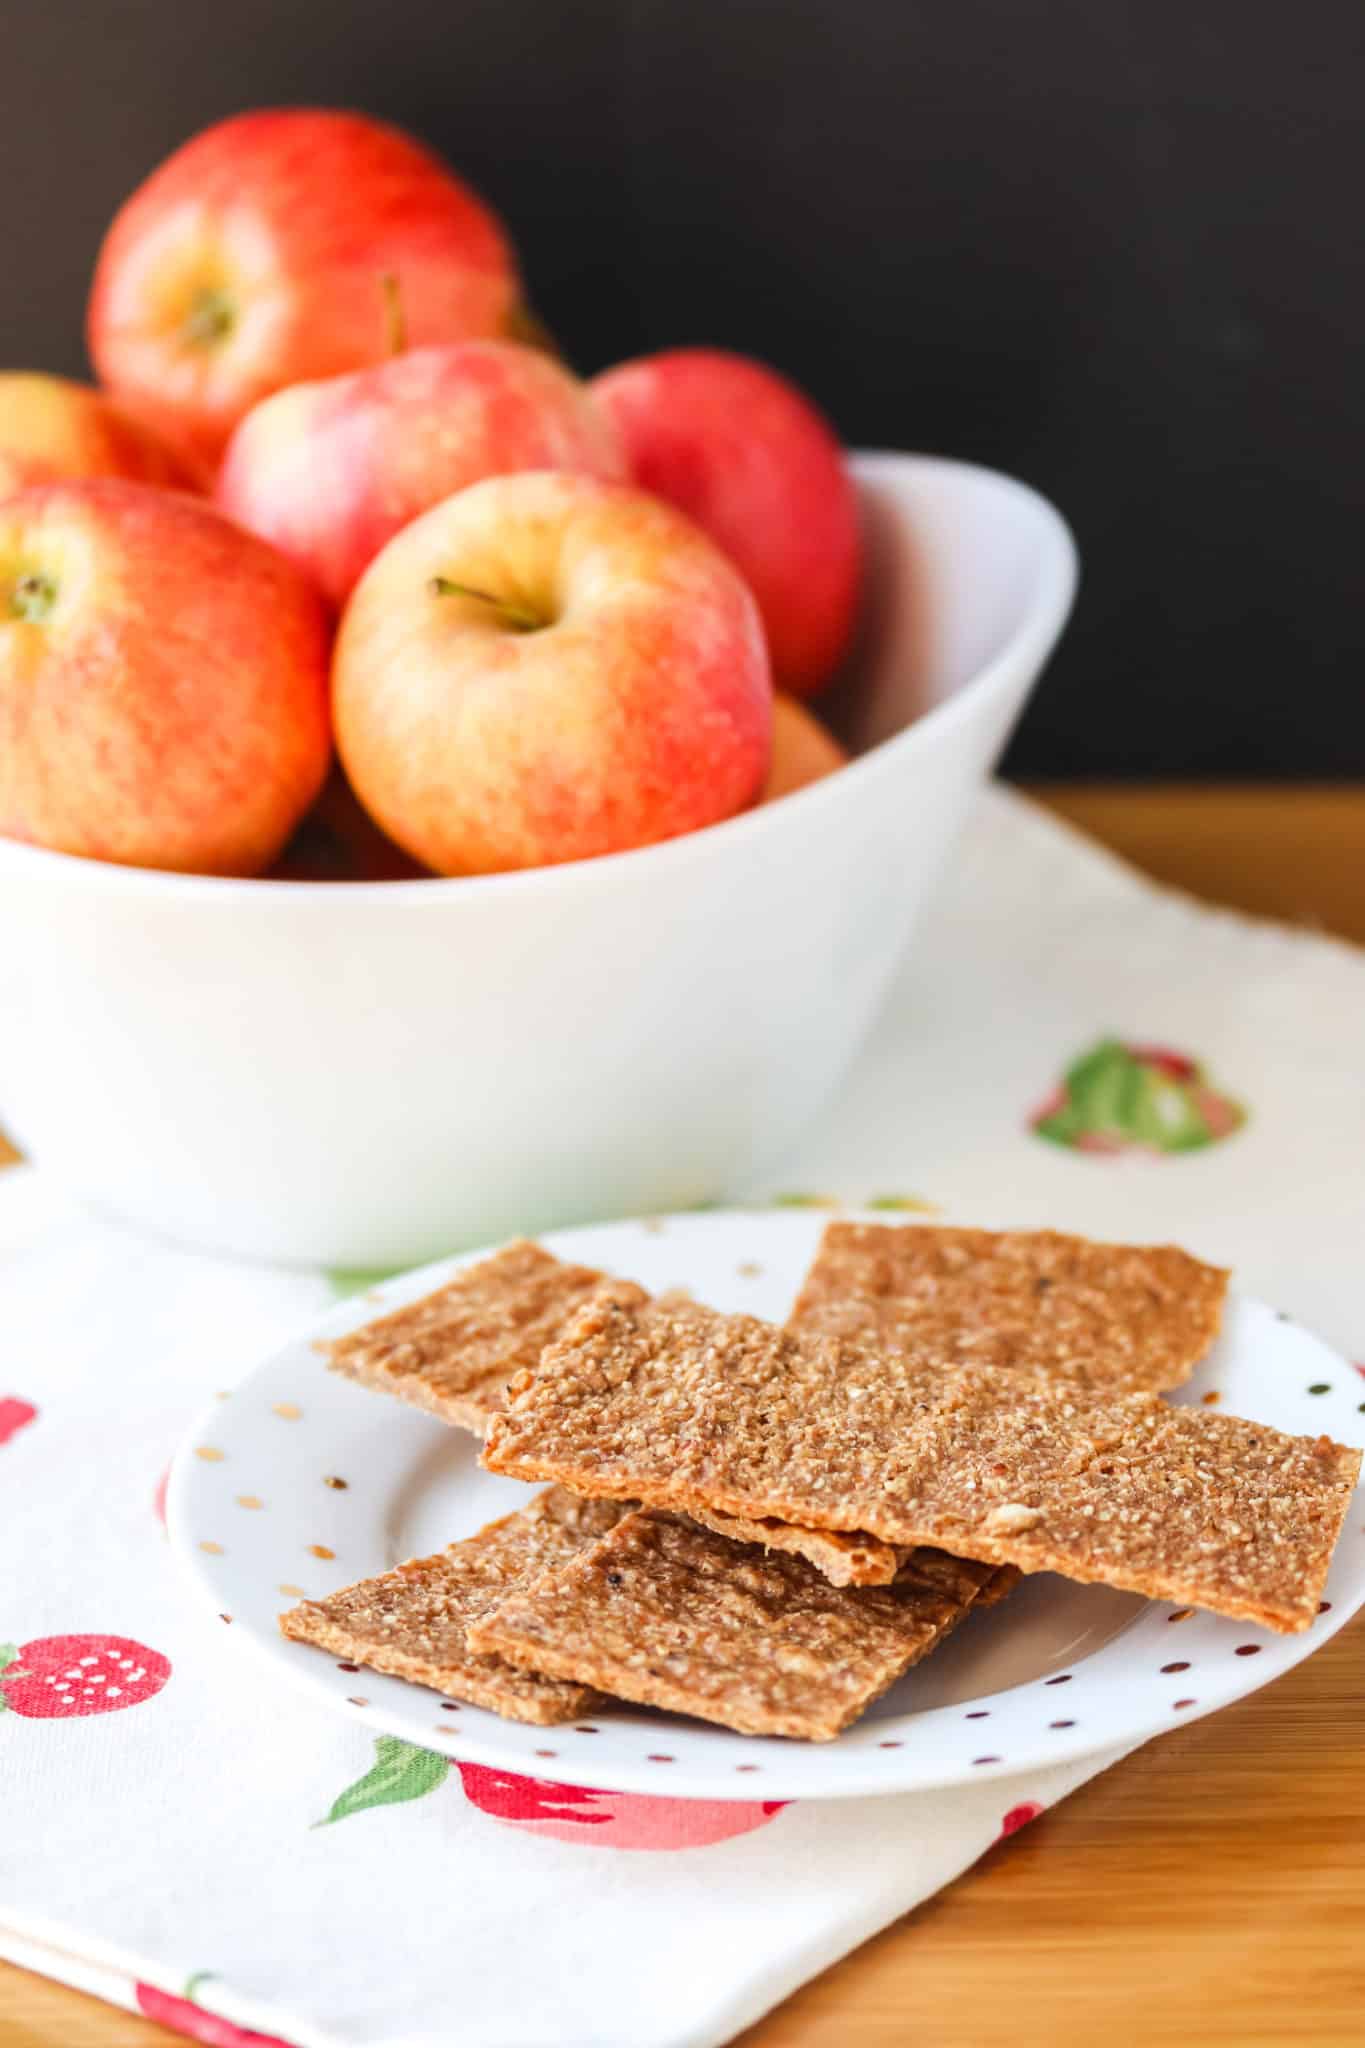 apple flax dehydrator crackers on a plate.